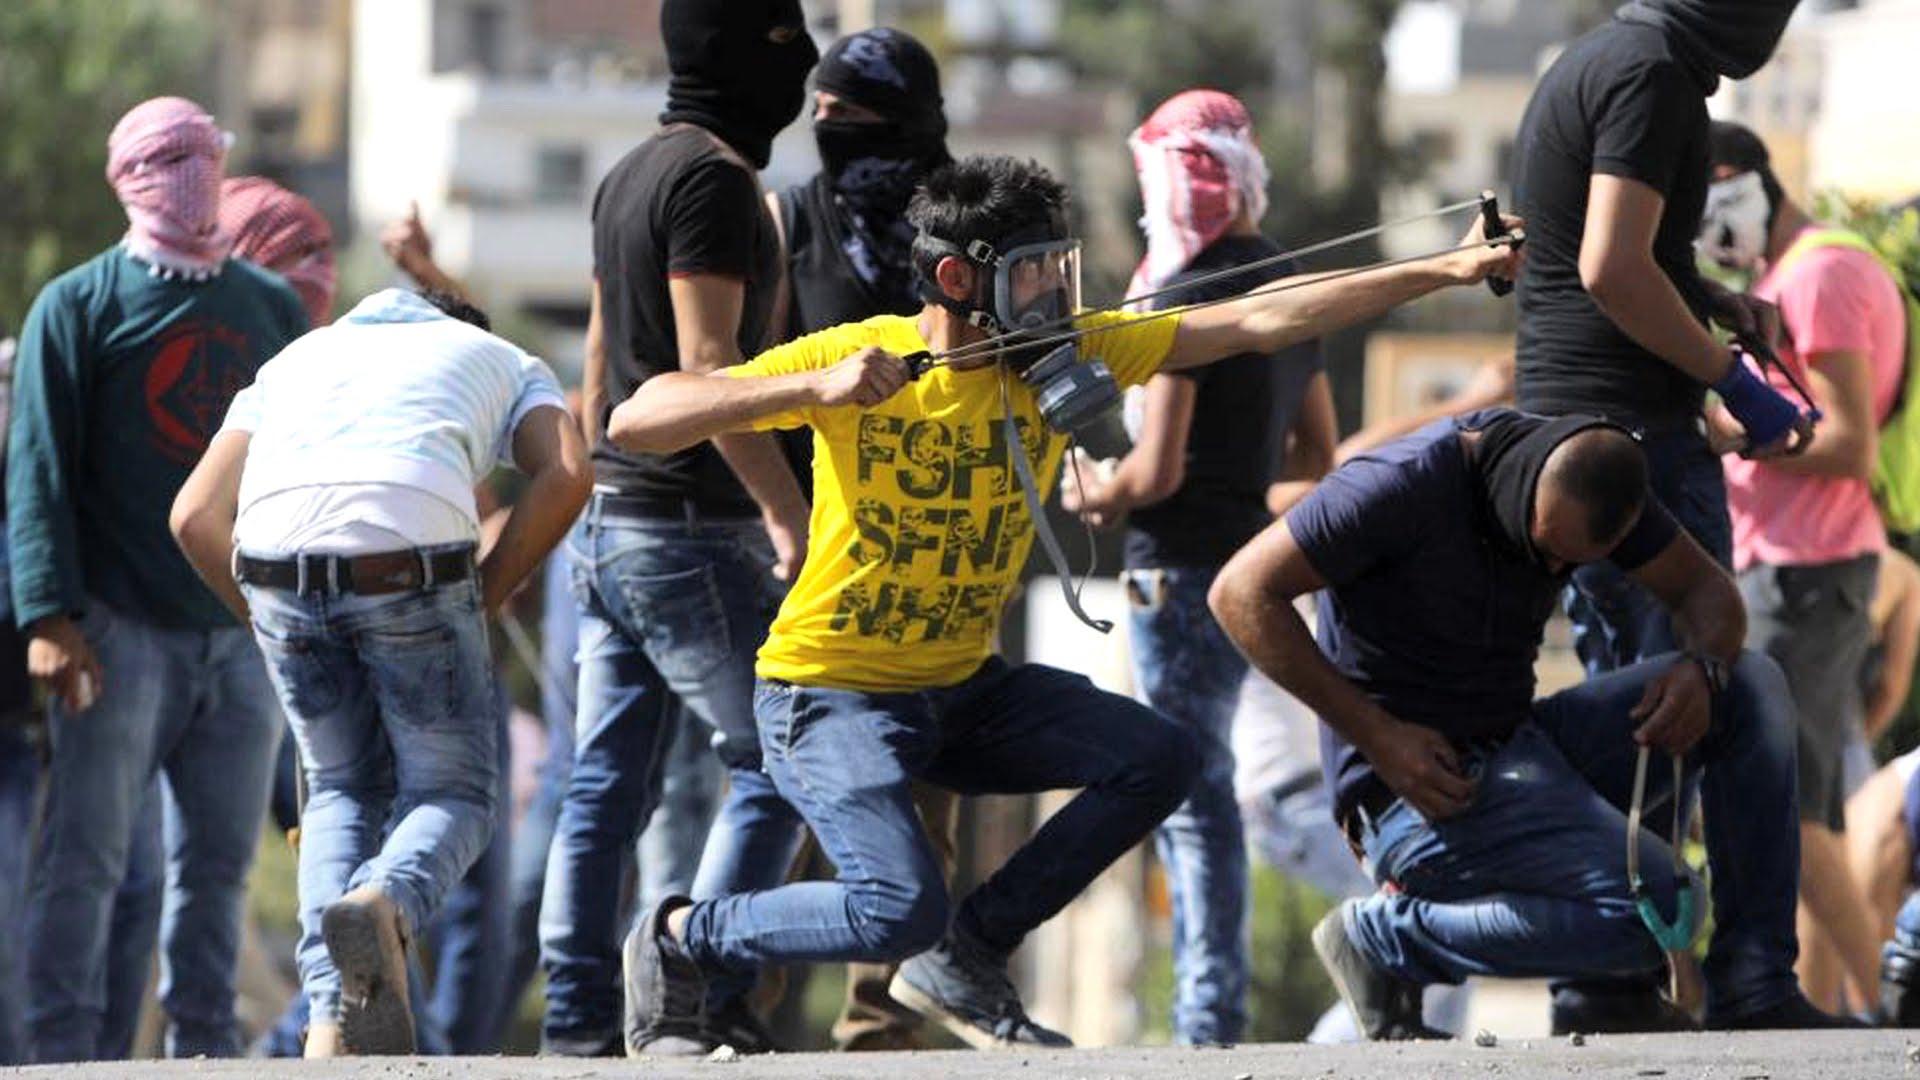 Is This the Third Intifada? Violent Unrest Grows as Palestinians